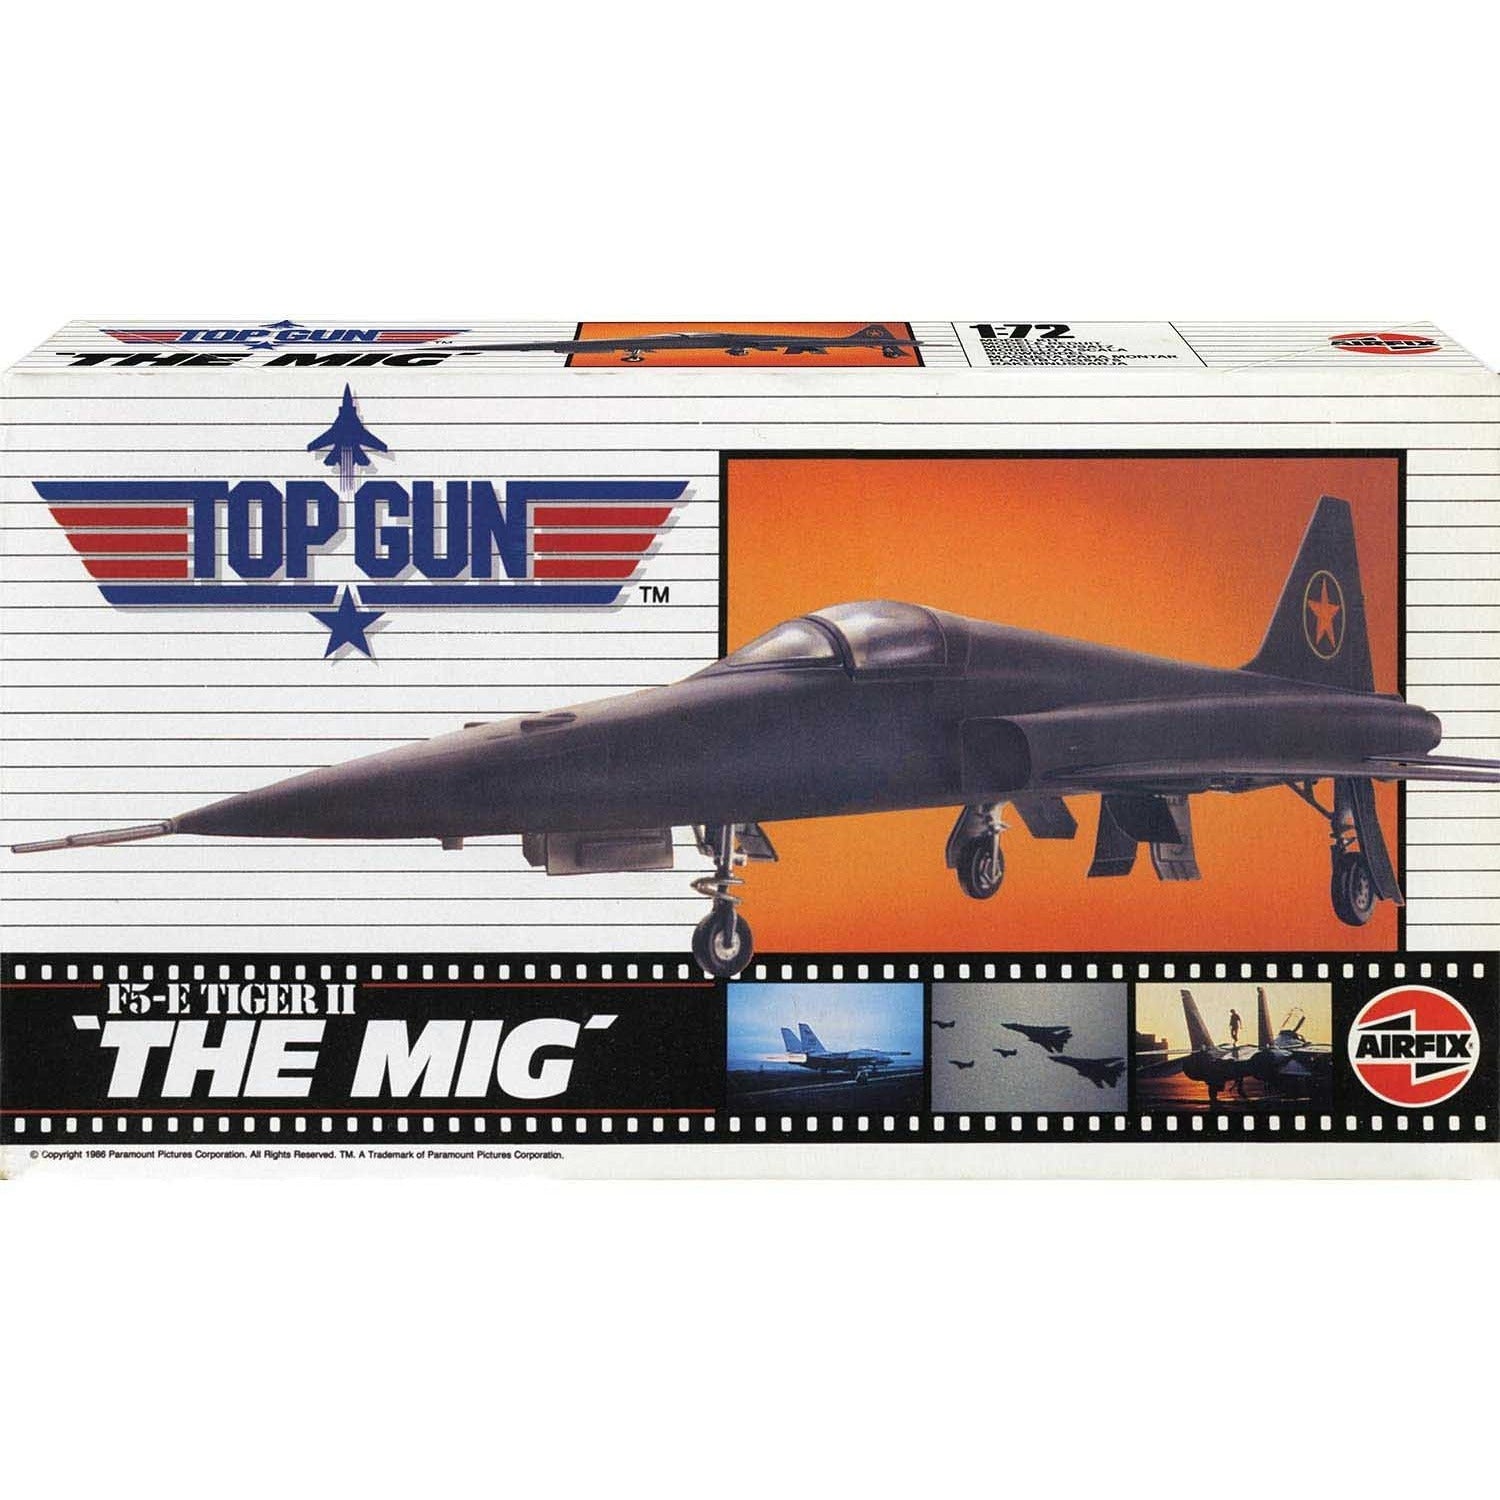 F5-E Tiger II "The MIG" 1/72 from Top Gun #00502 by AirFix